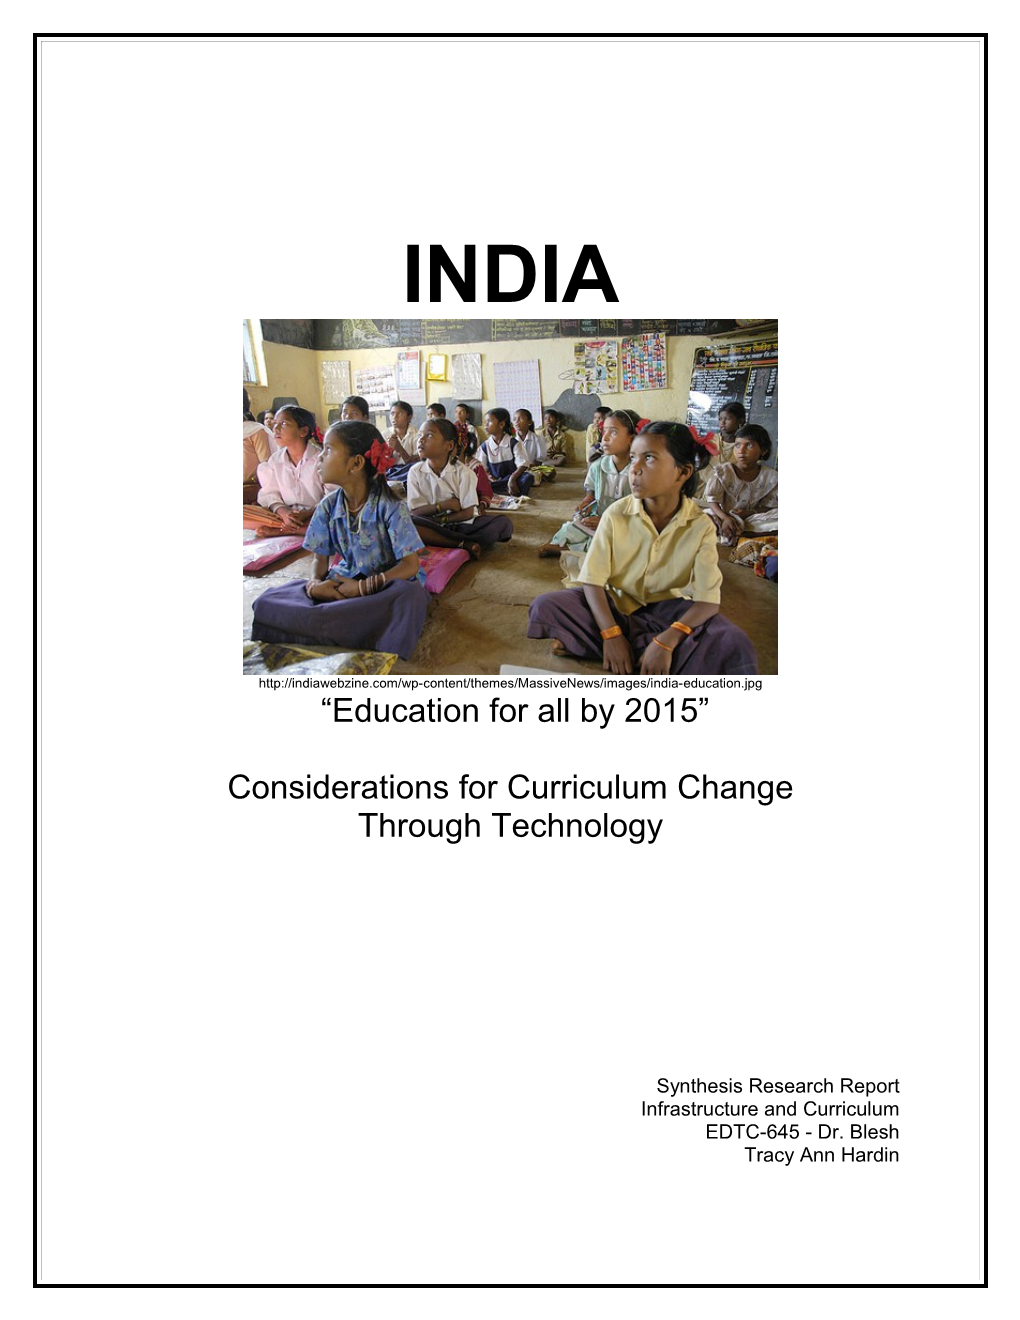 Considerations for Curriculum Change